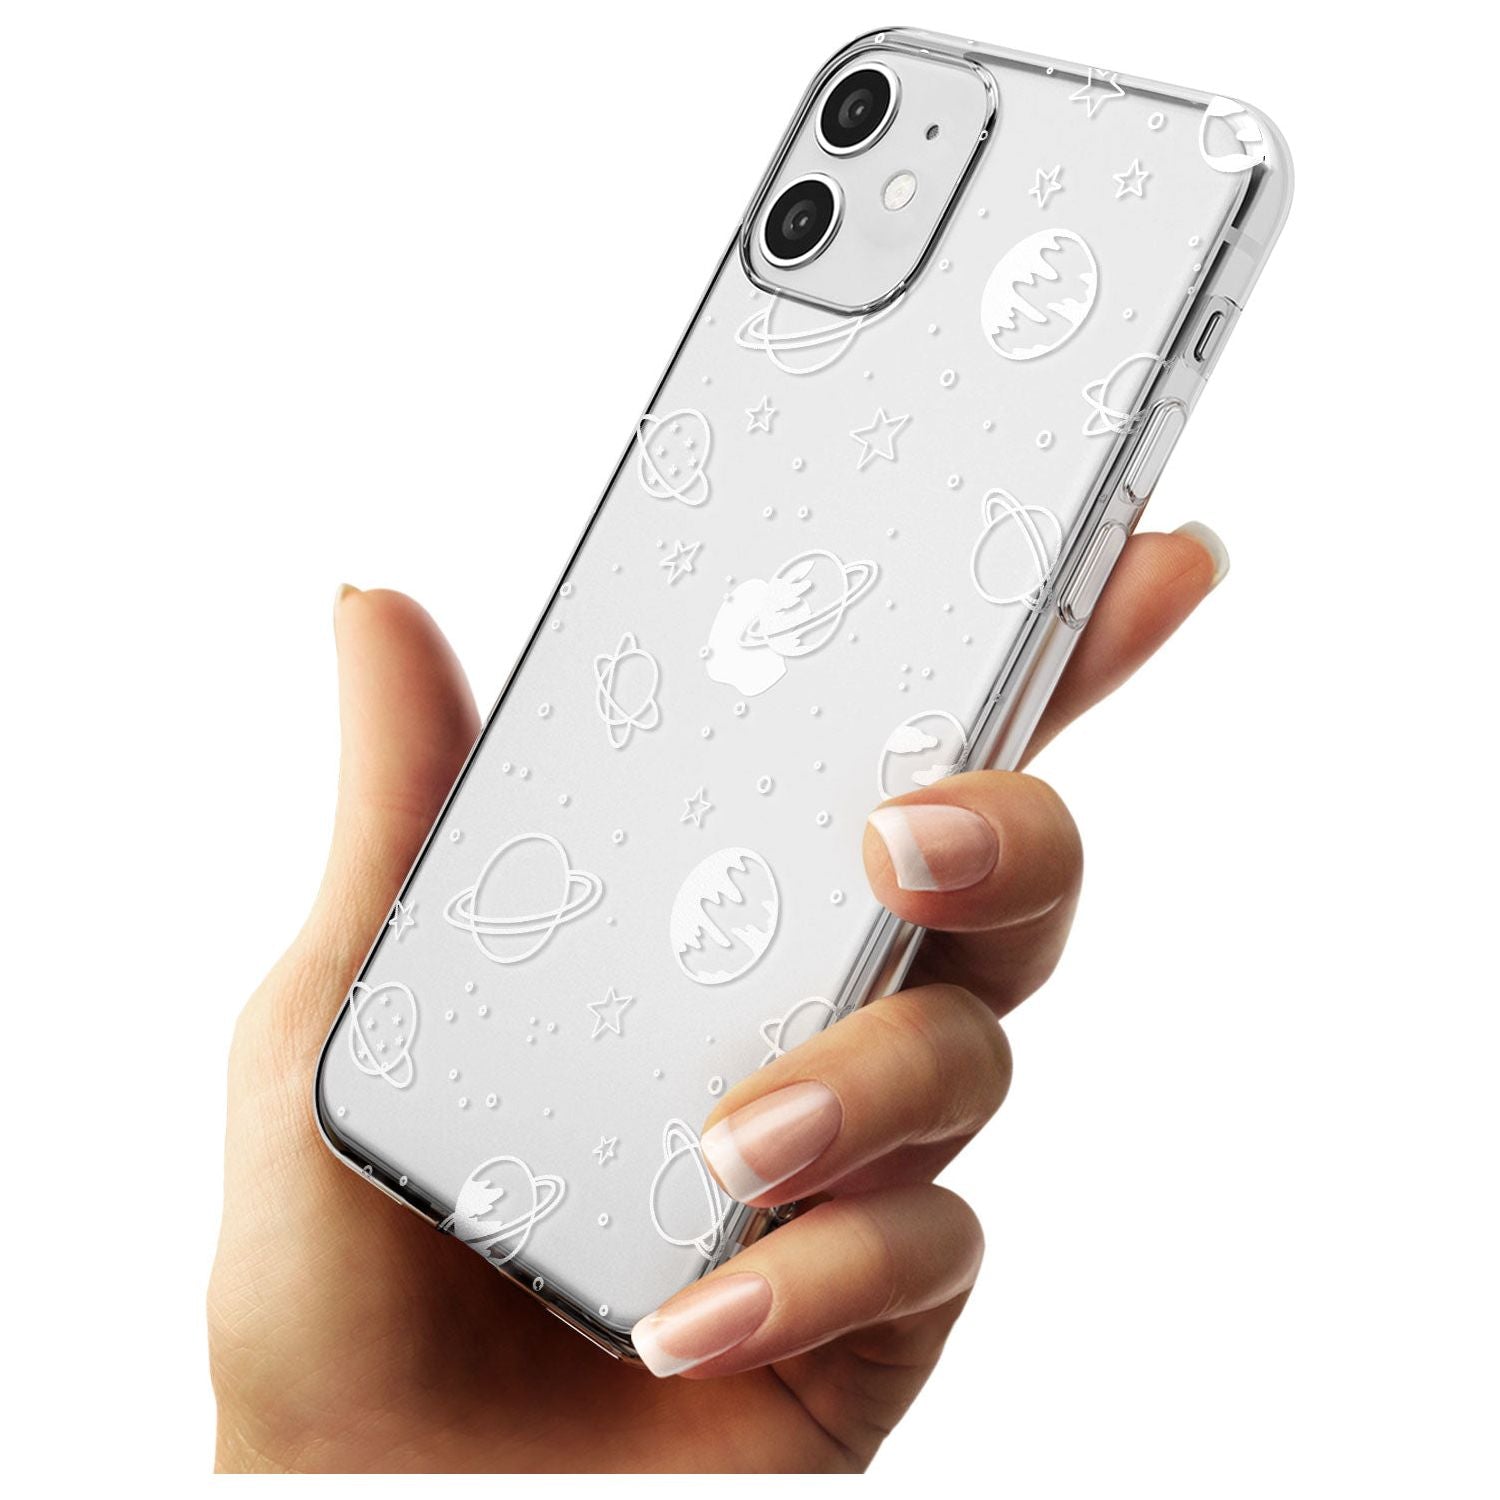 Outer Space Outlines: White on Clear Black Impact Phone Case for iPhone 11